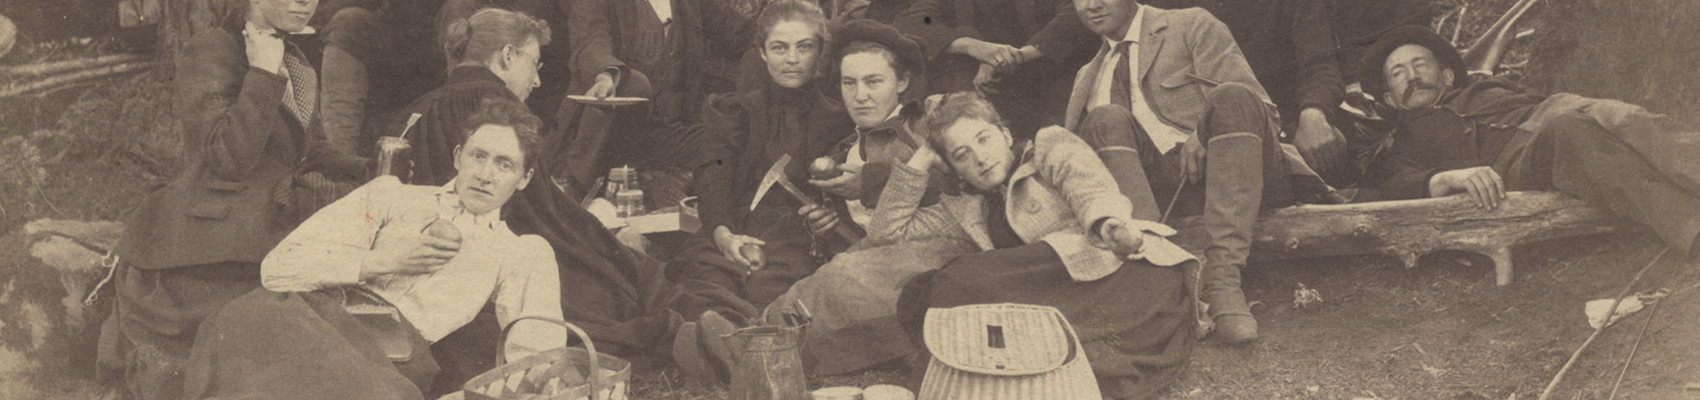 Lou Henry Hoover and Zoological Club having a picnic